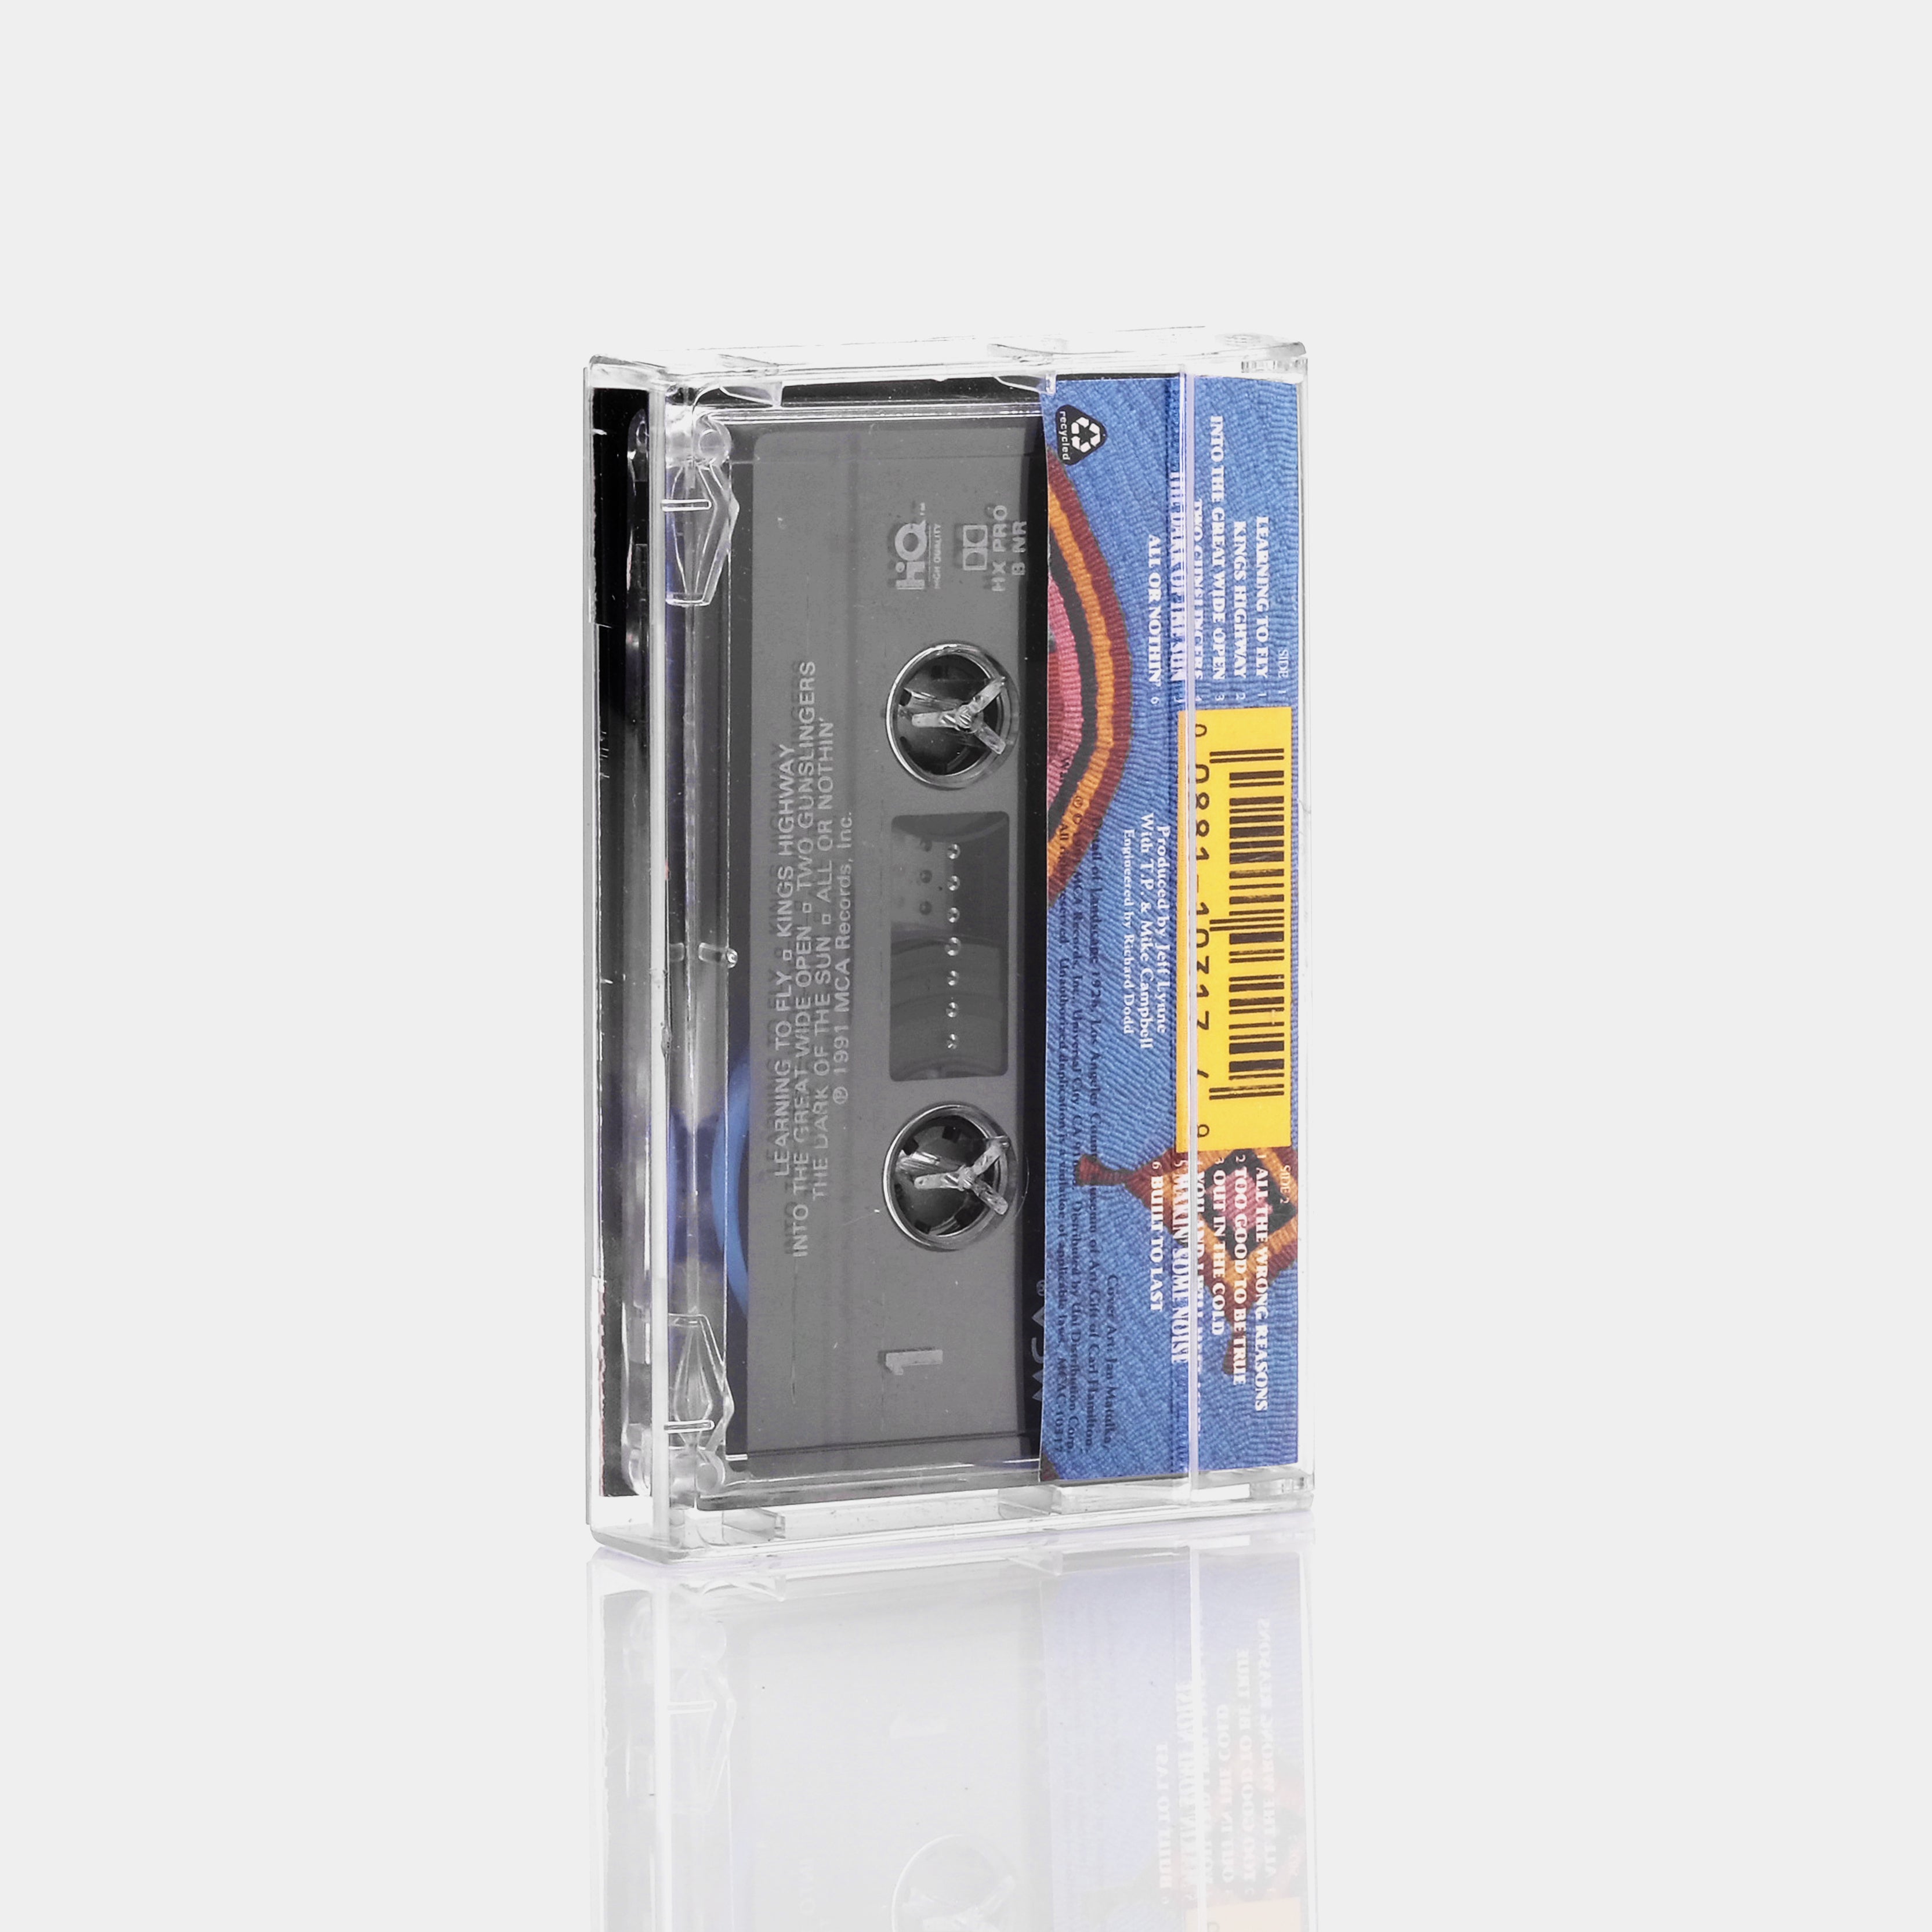 Tom Petty And The Heartbreakers - Into The Great Wide Open Cassette Tape